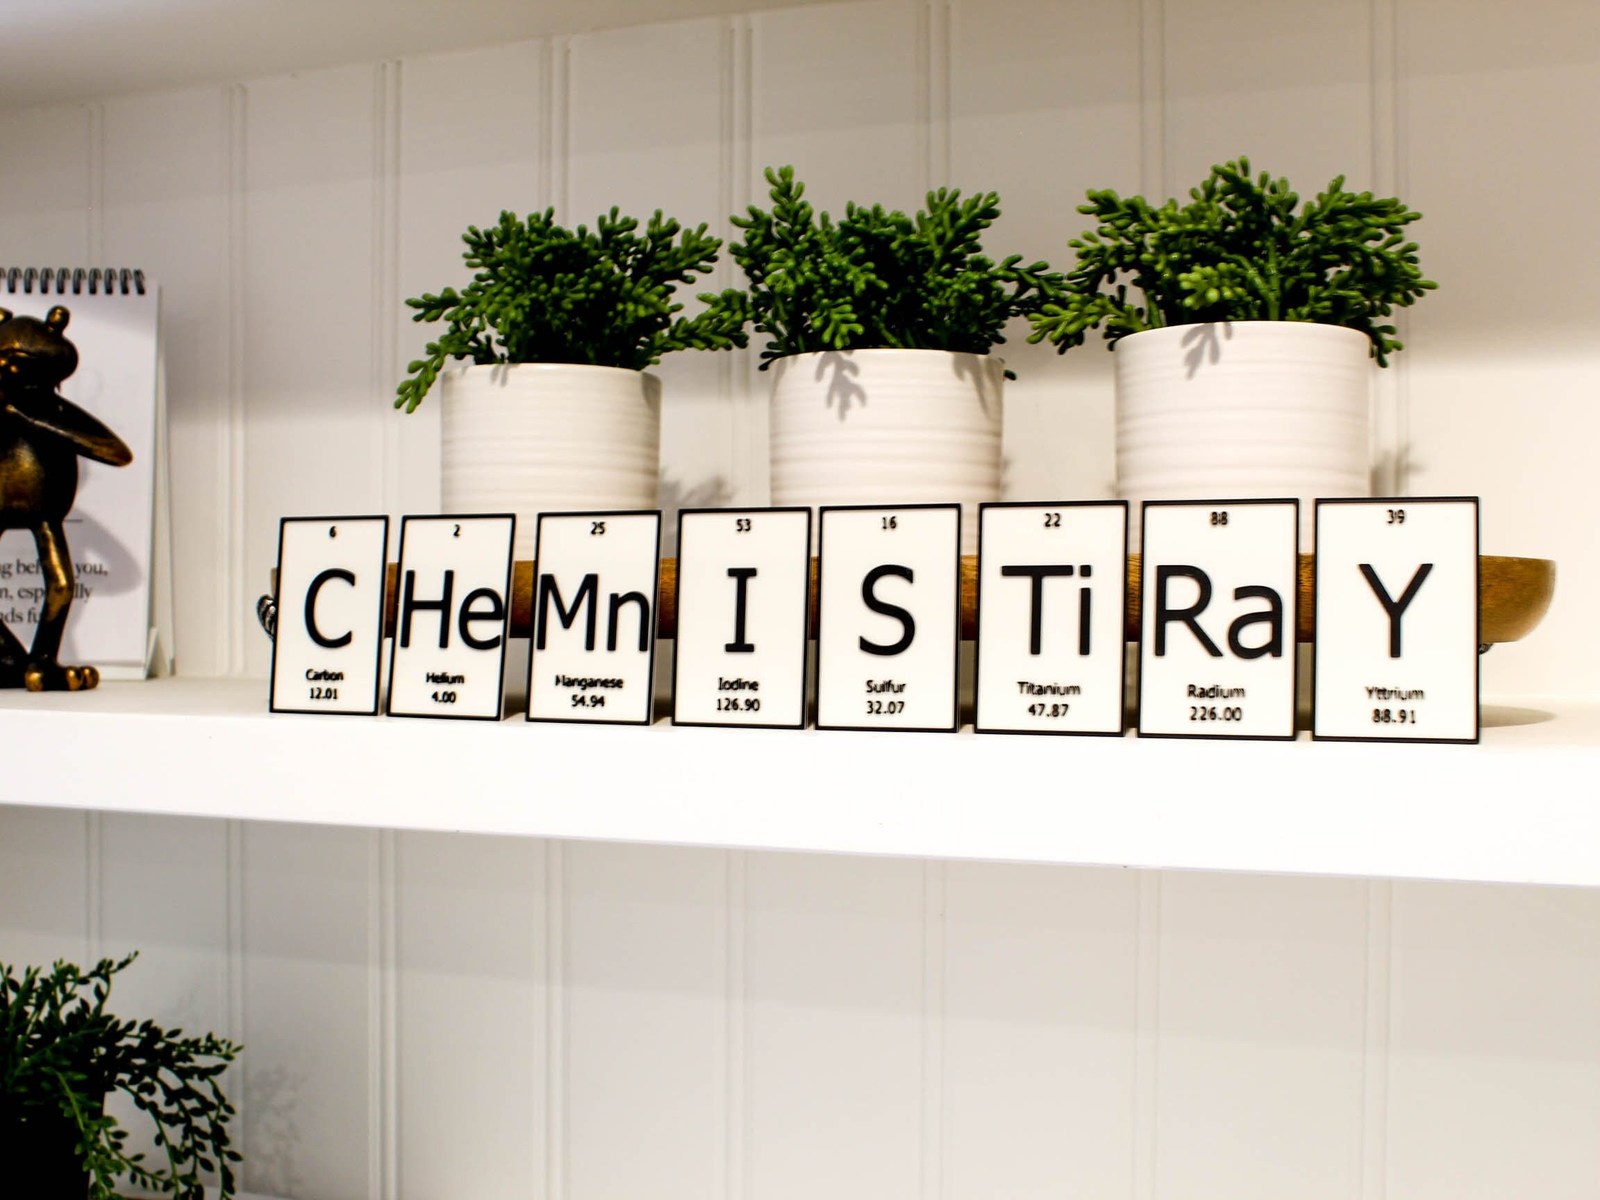 Primary image for CHeMnISTiRaY | Periodic Table of Elements Wall, Desk or Shelf Sign